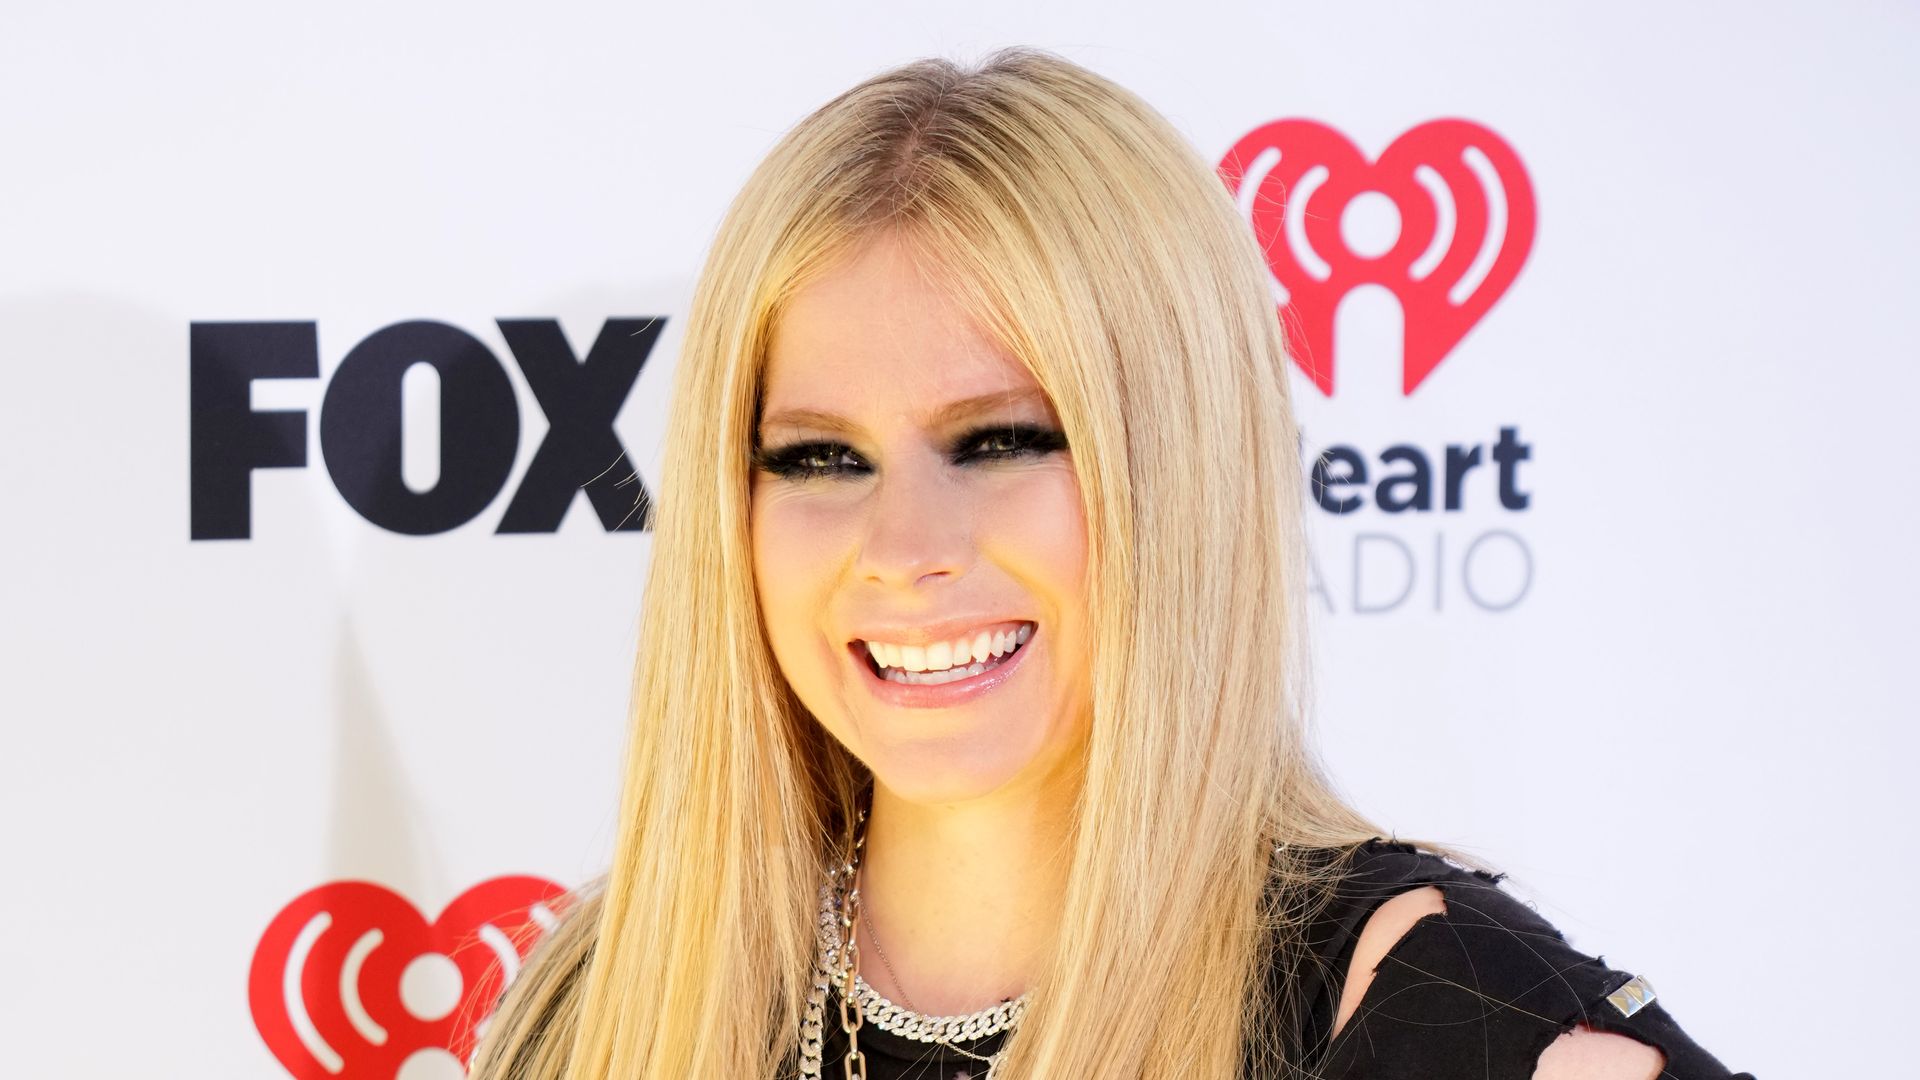 Avril Lavigne fits into her 'Complicated' tank top and tie 22 years later in latest photo – and she hasn't changed one bit